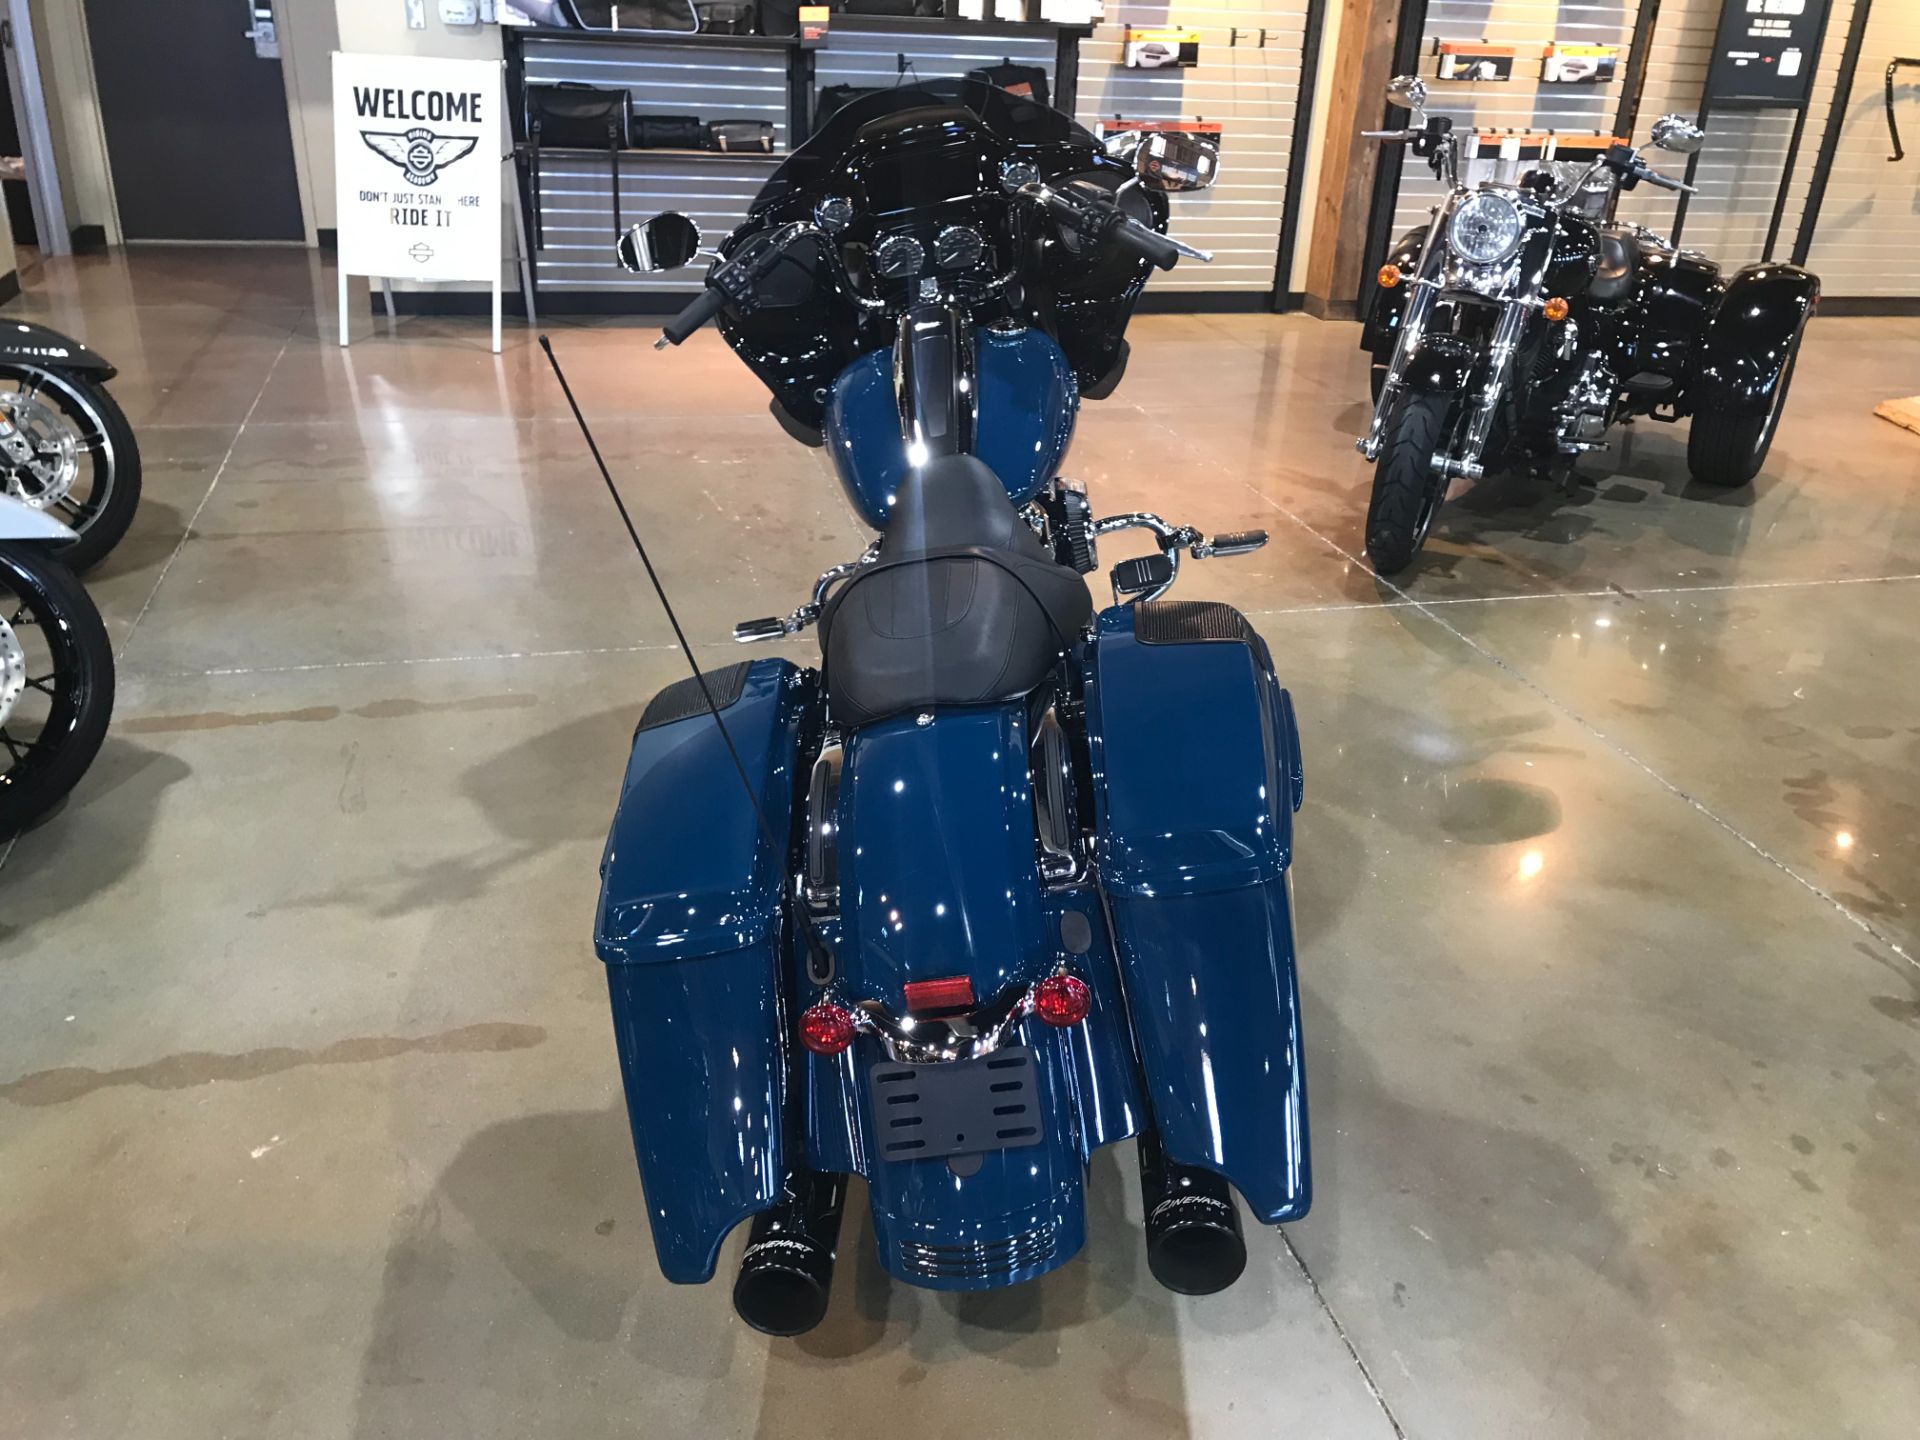 2021 Harley-Davidson Road Glide® Special in Kingwood, Texas - Photo 2